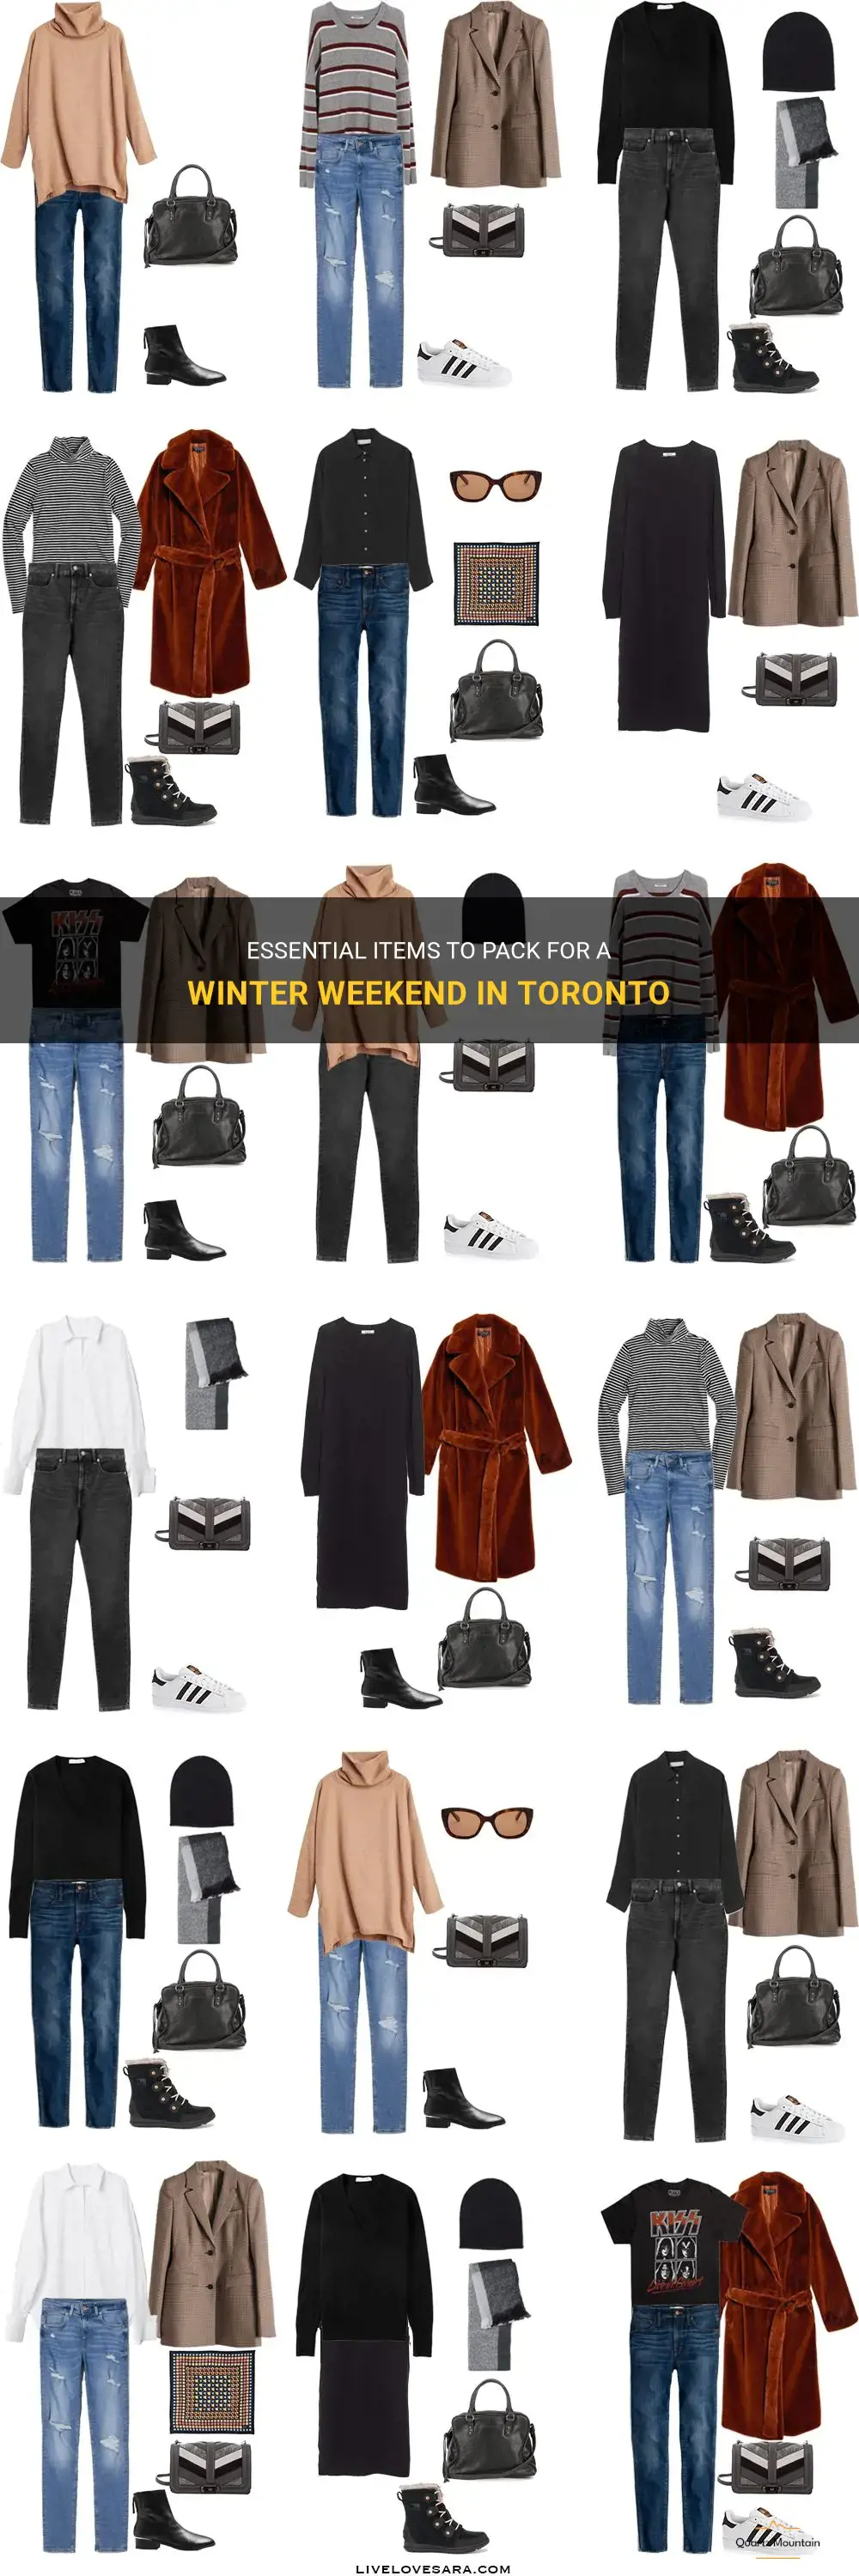 what to pack for a weekend in toronto in winter